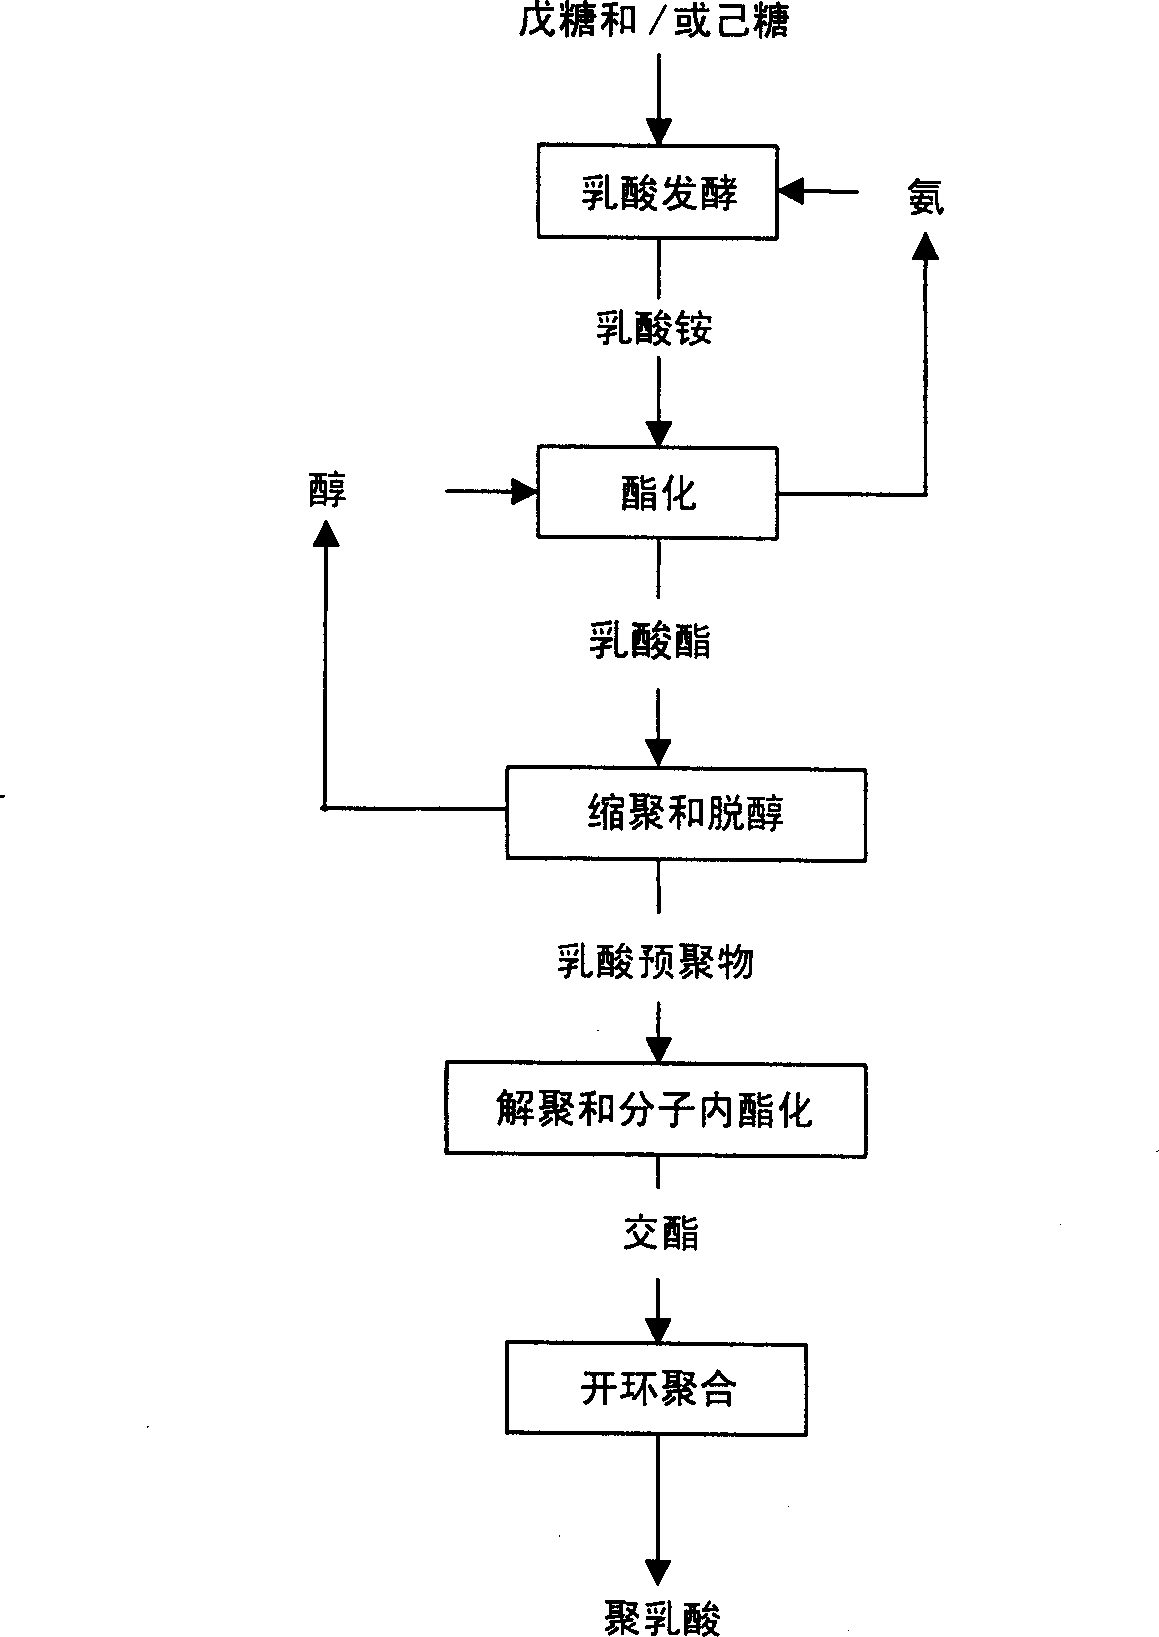 Mfg. Method of cyclic diester using fermented lactic acid as raw material and method for mfg. polylactic acid